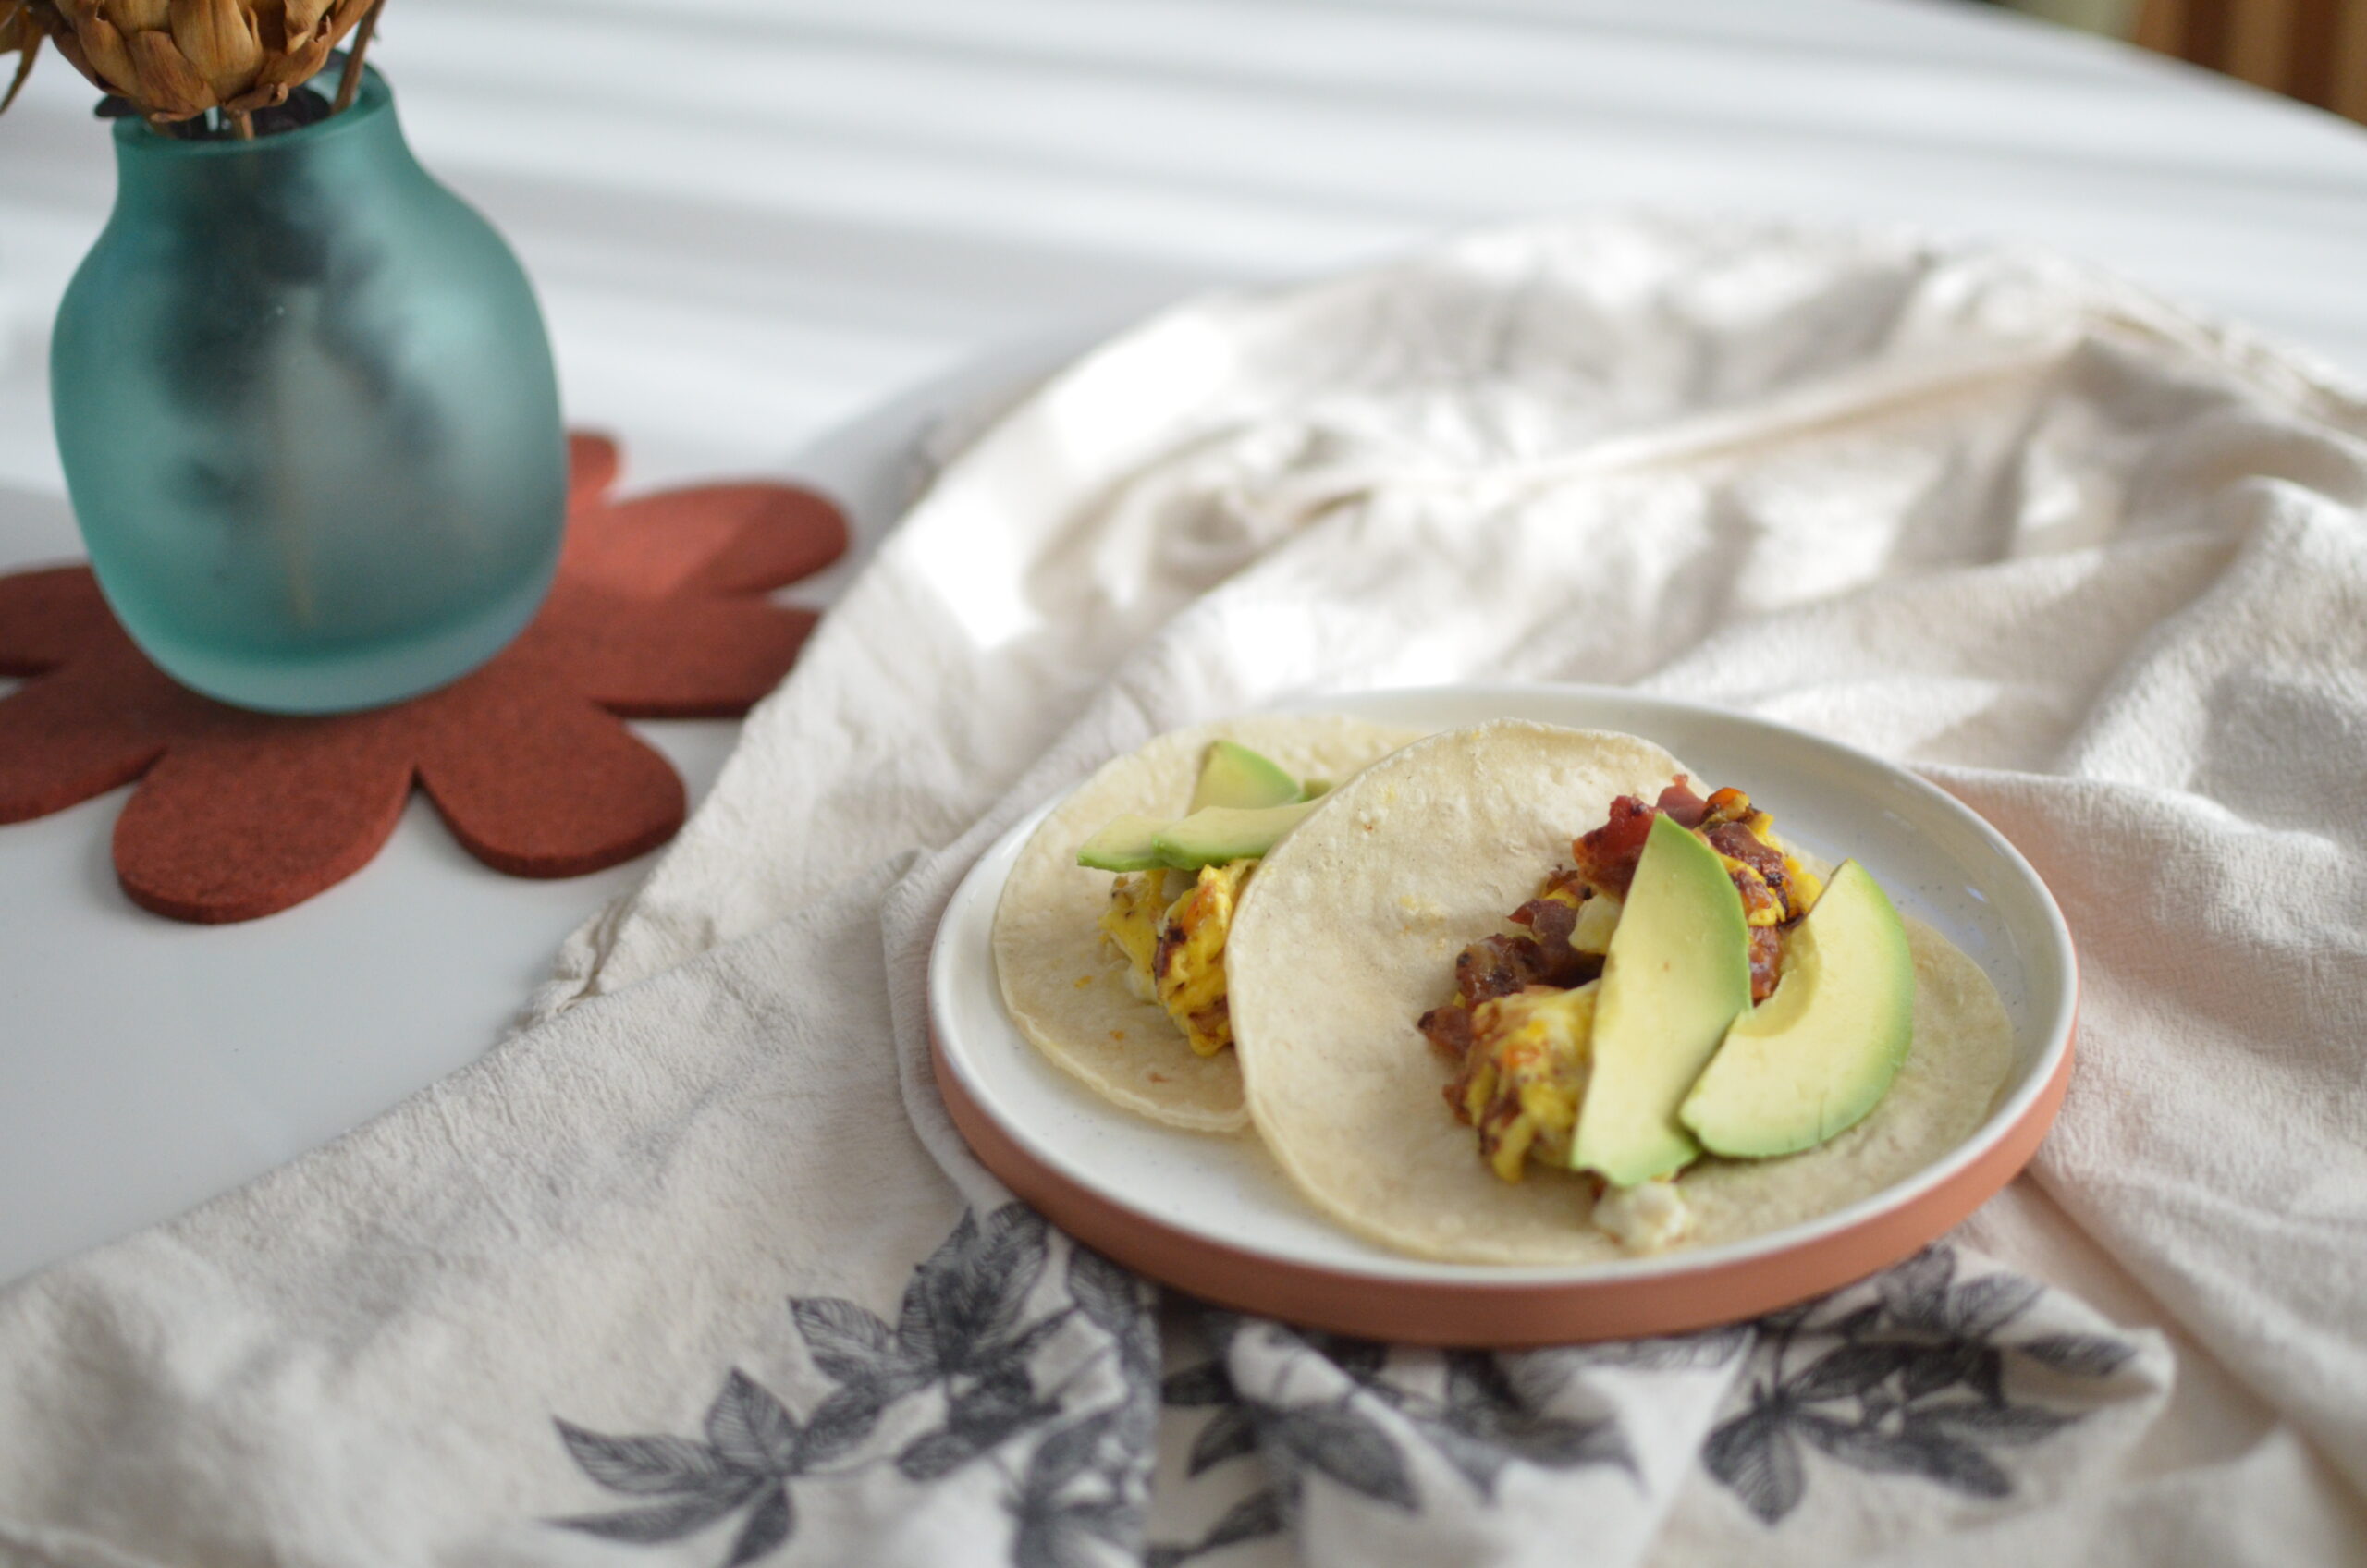 Wake up, sunshine. Breakfast is ready! We’ve taken all your favorite breakfast components and packed them into a hand-held tortilla.